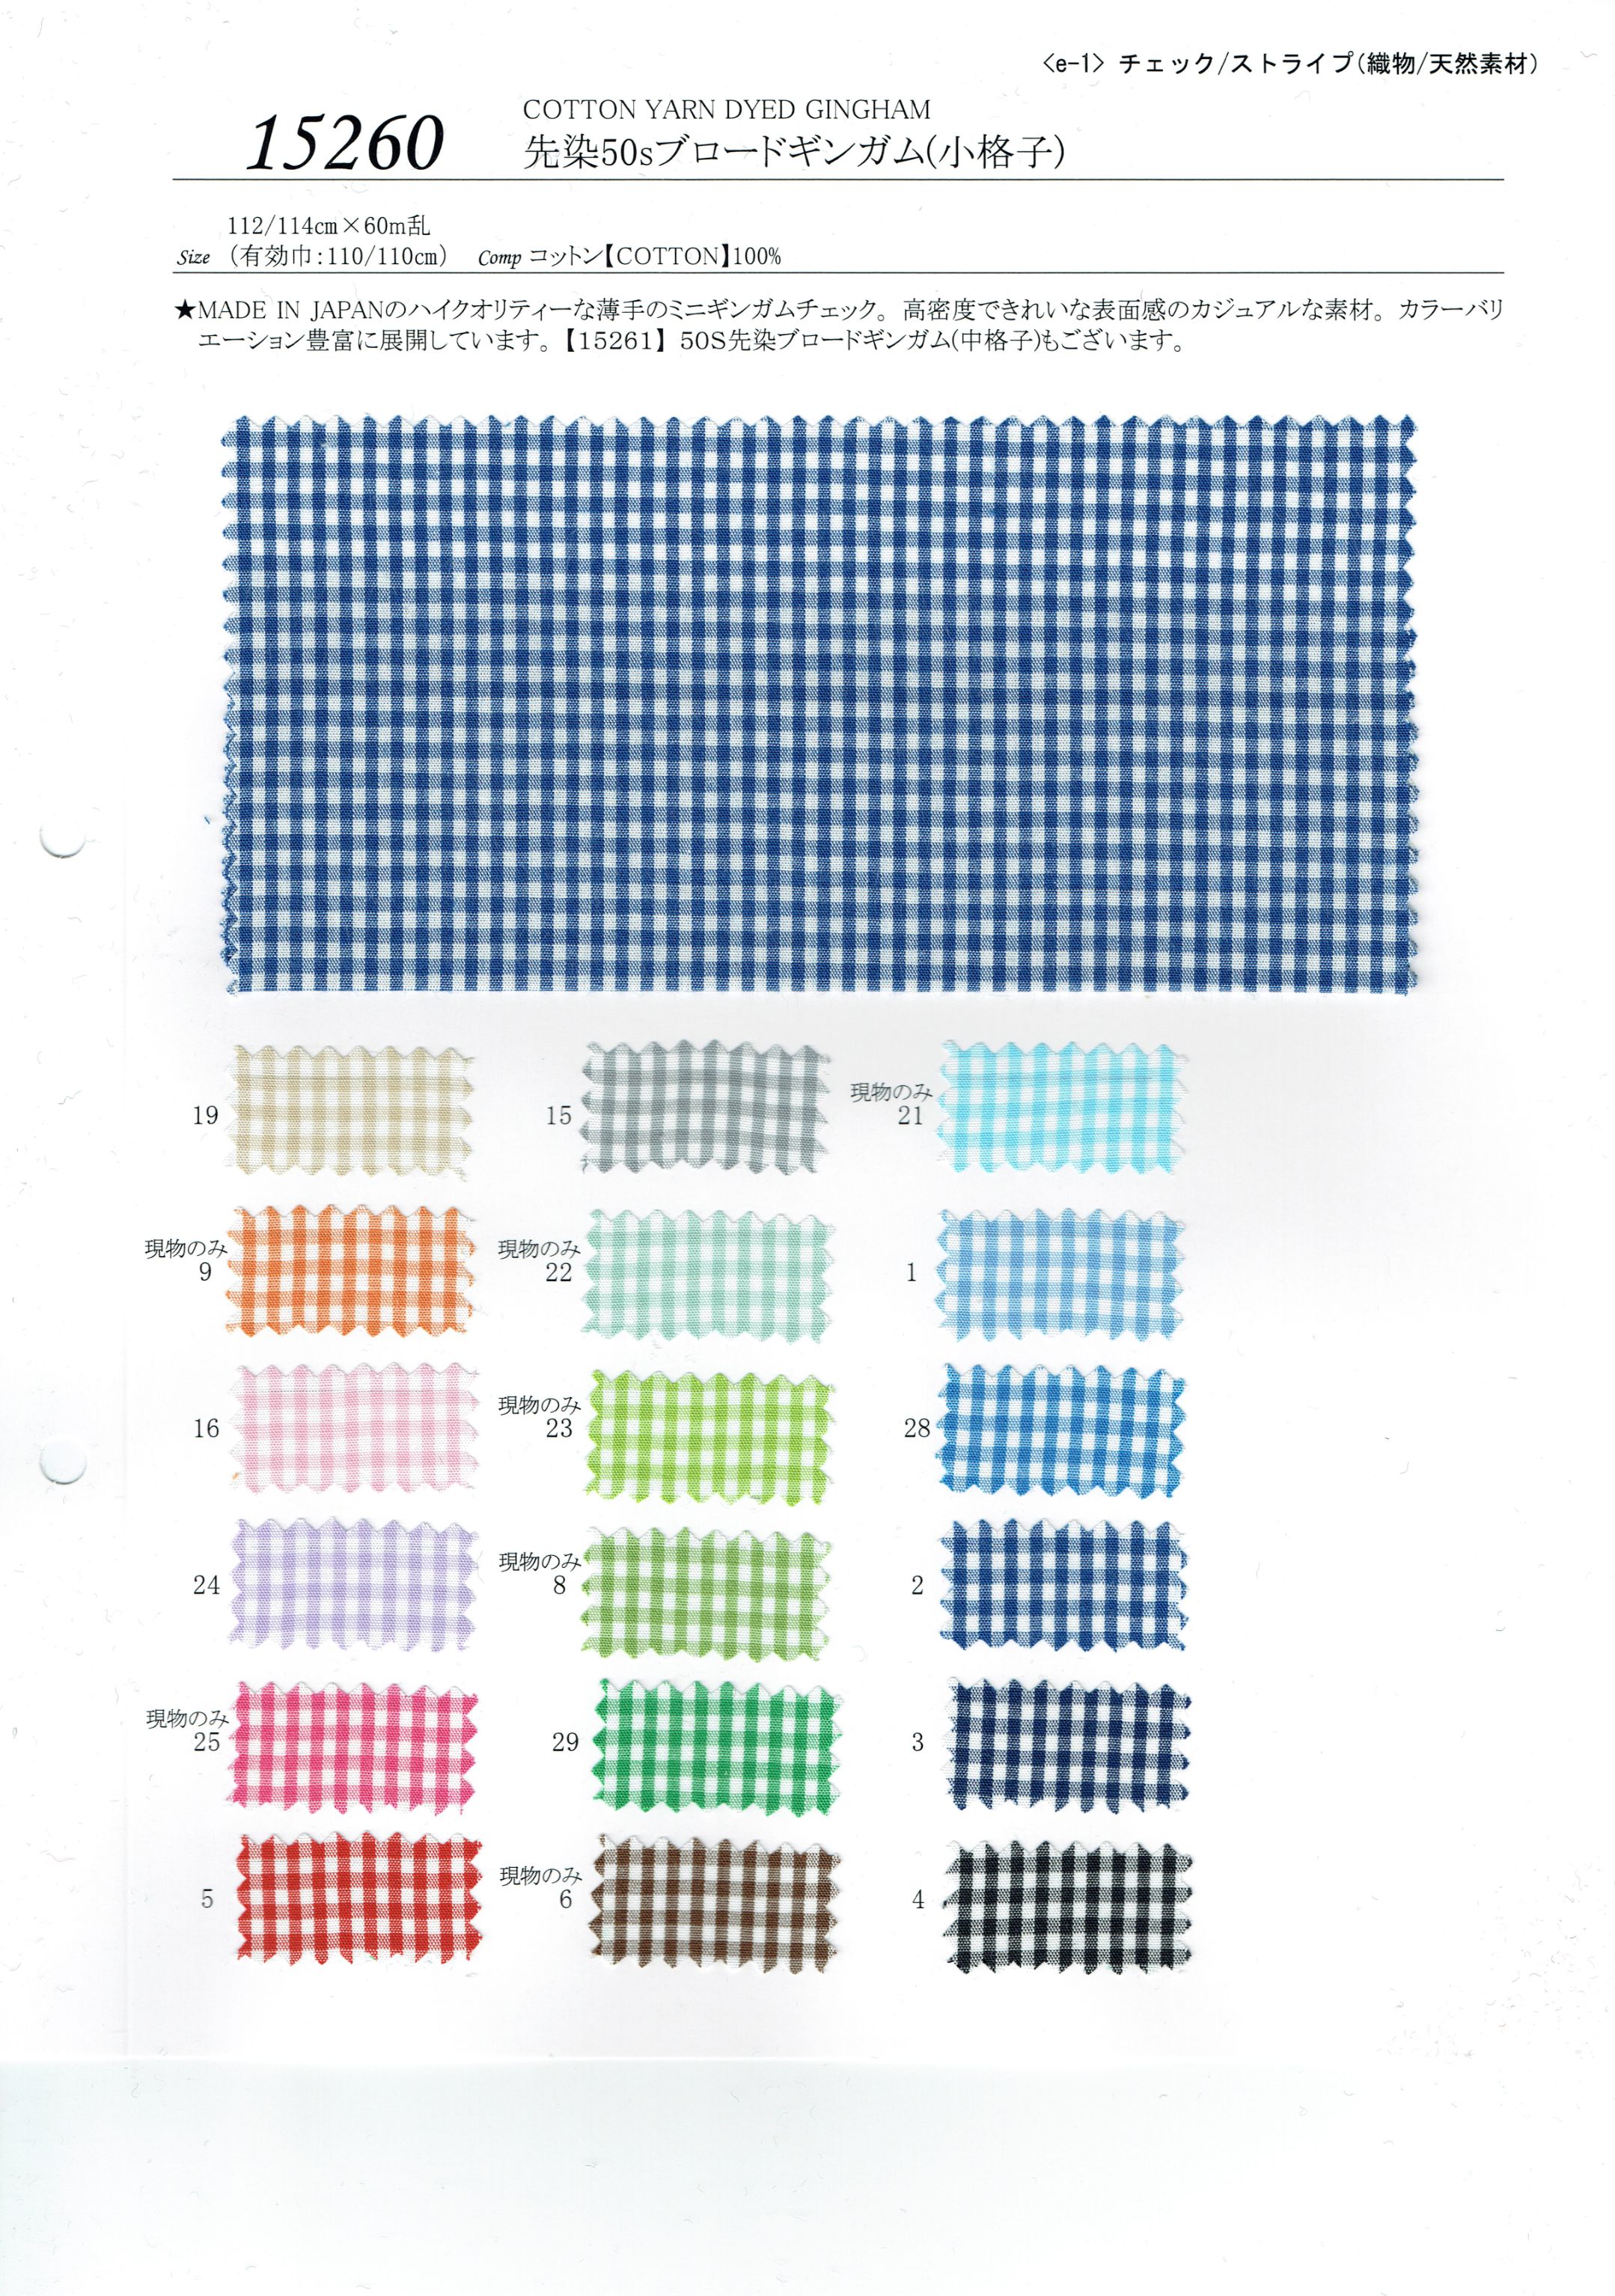 View COTTON100 YARN DYED GINGHAM YARN DYED GINGHAM